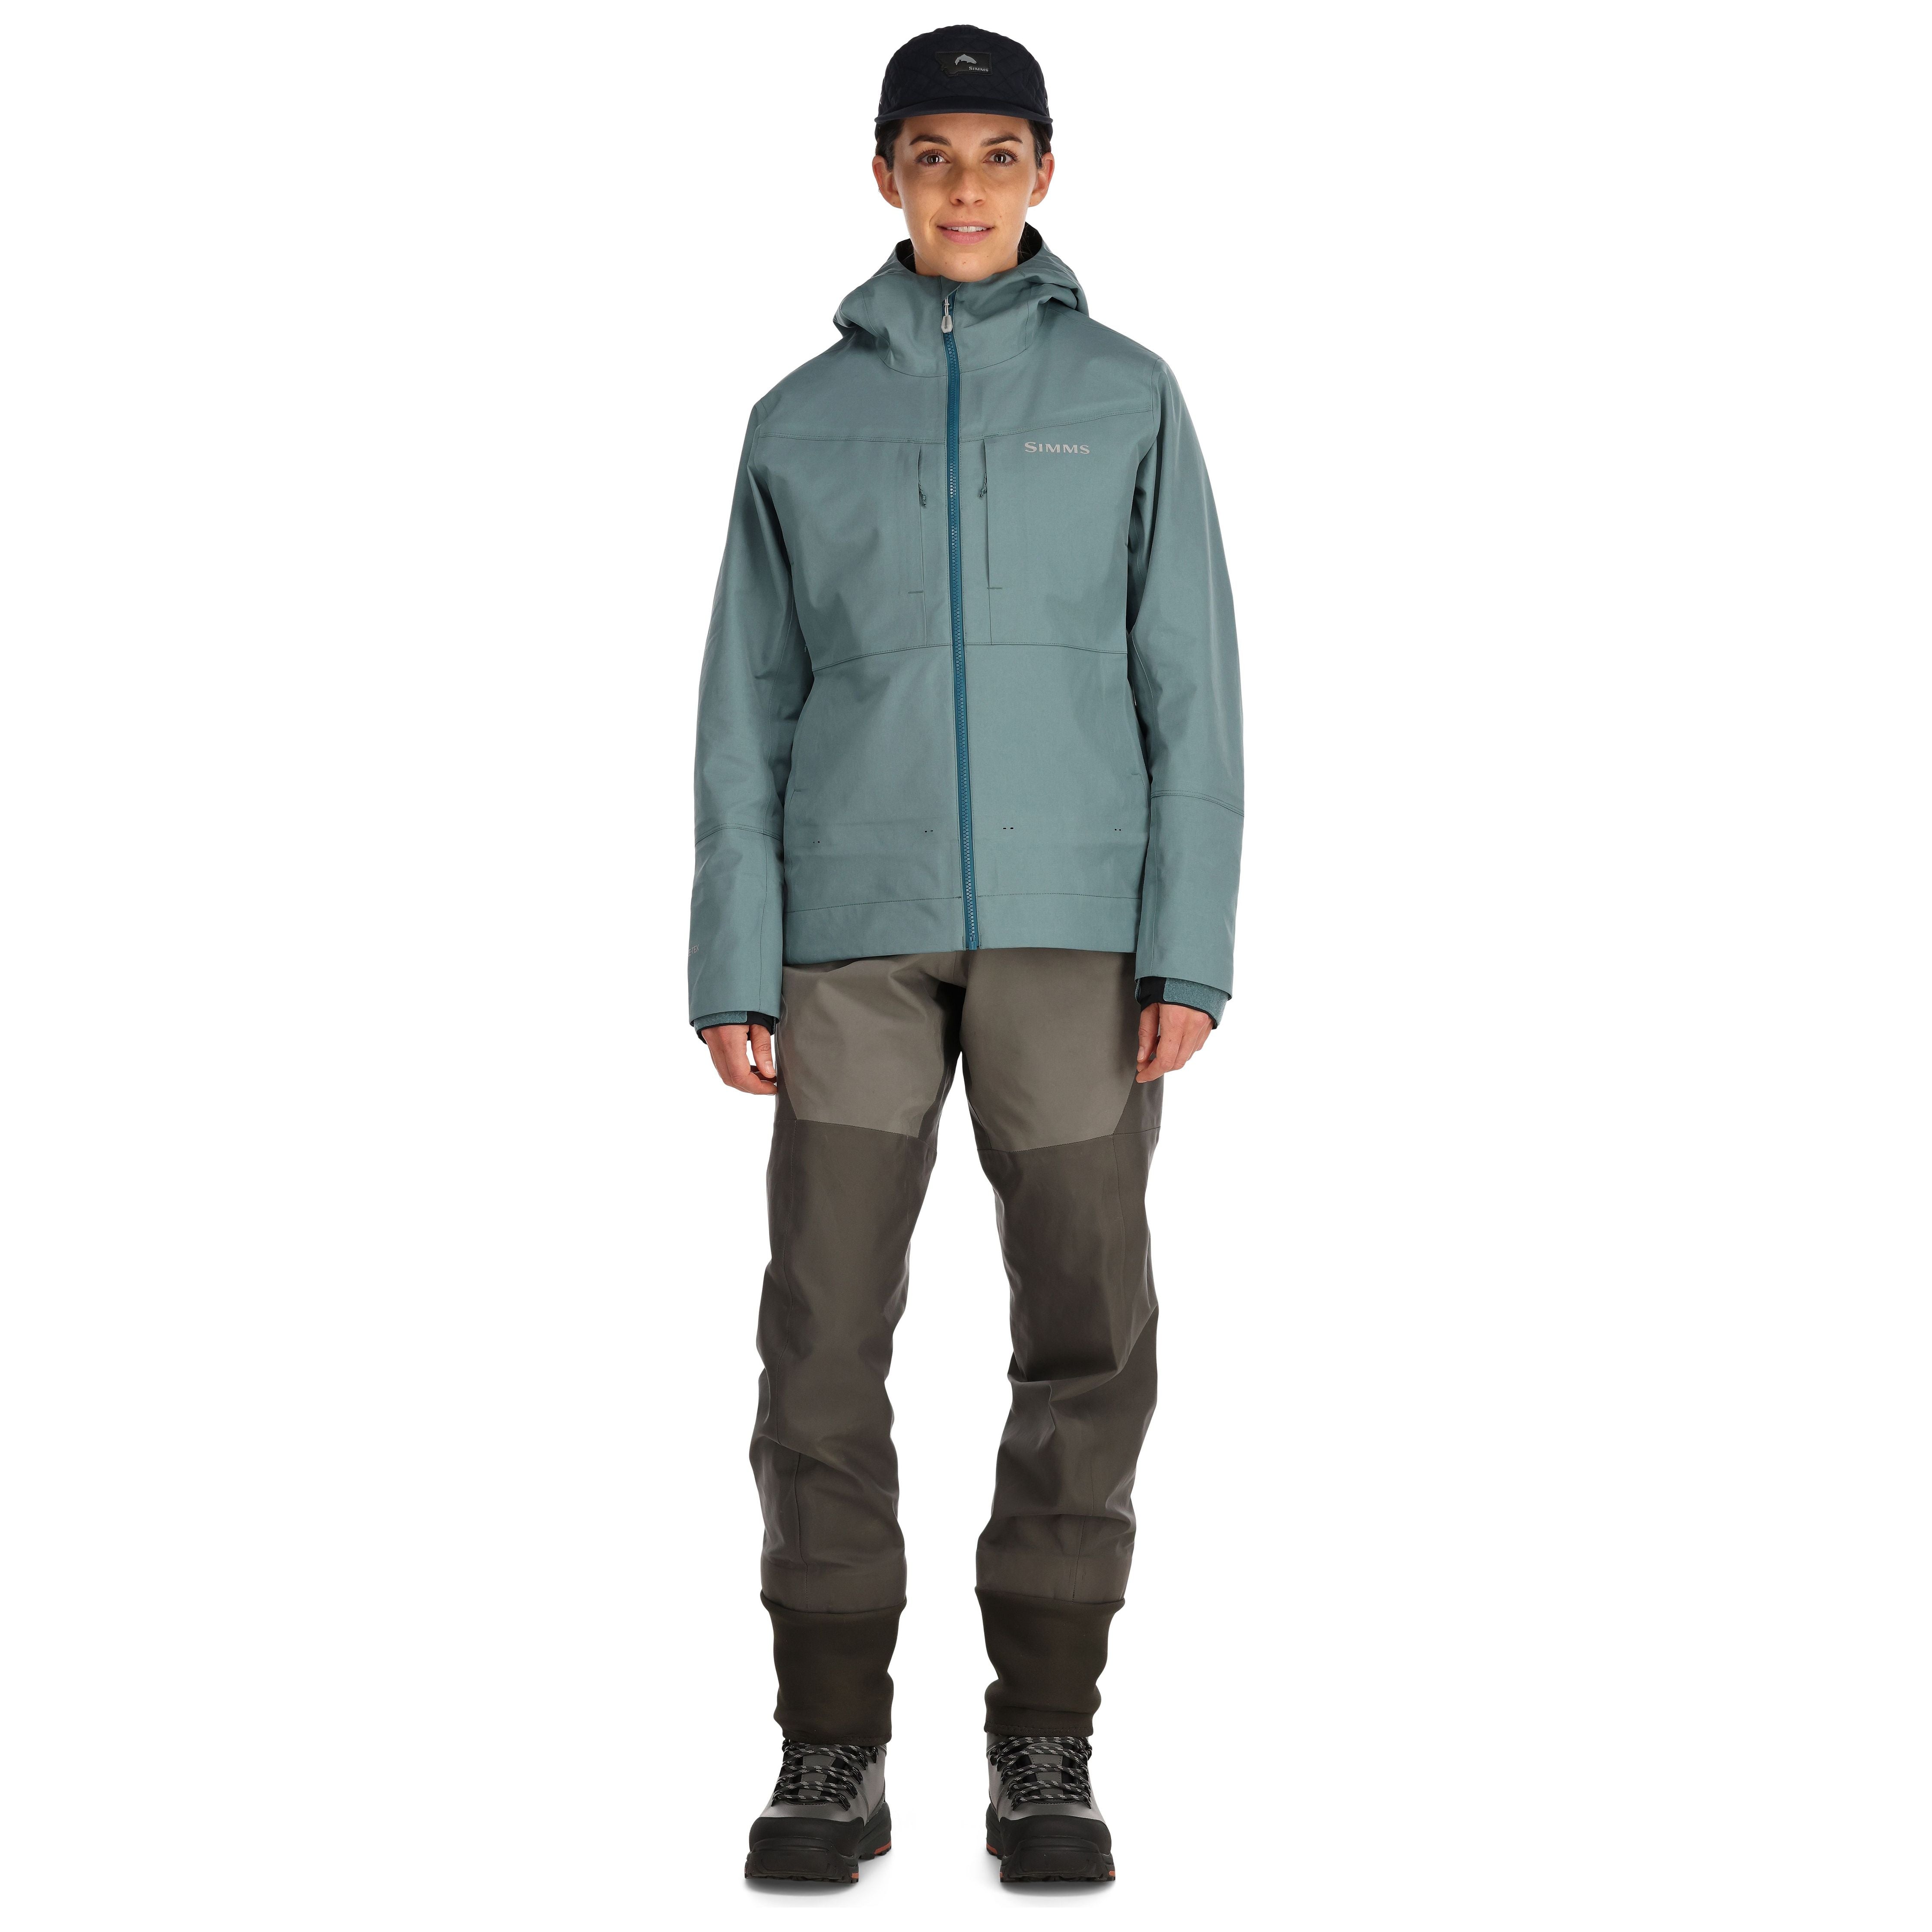 Simms Women's G3 Guide Jacket Avalon Teal Image 02